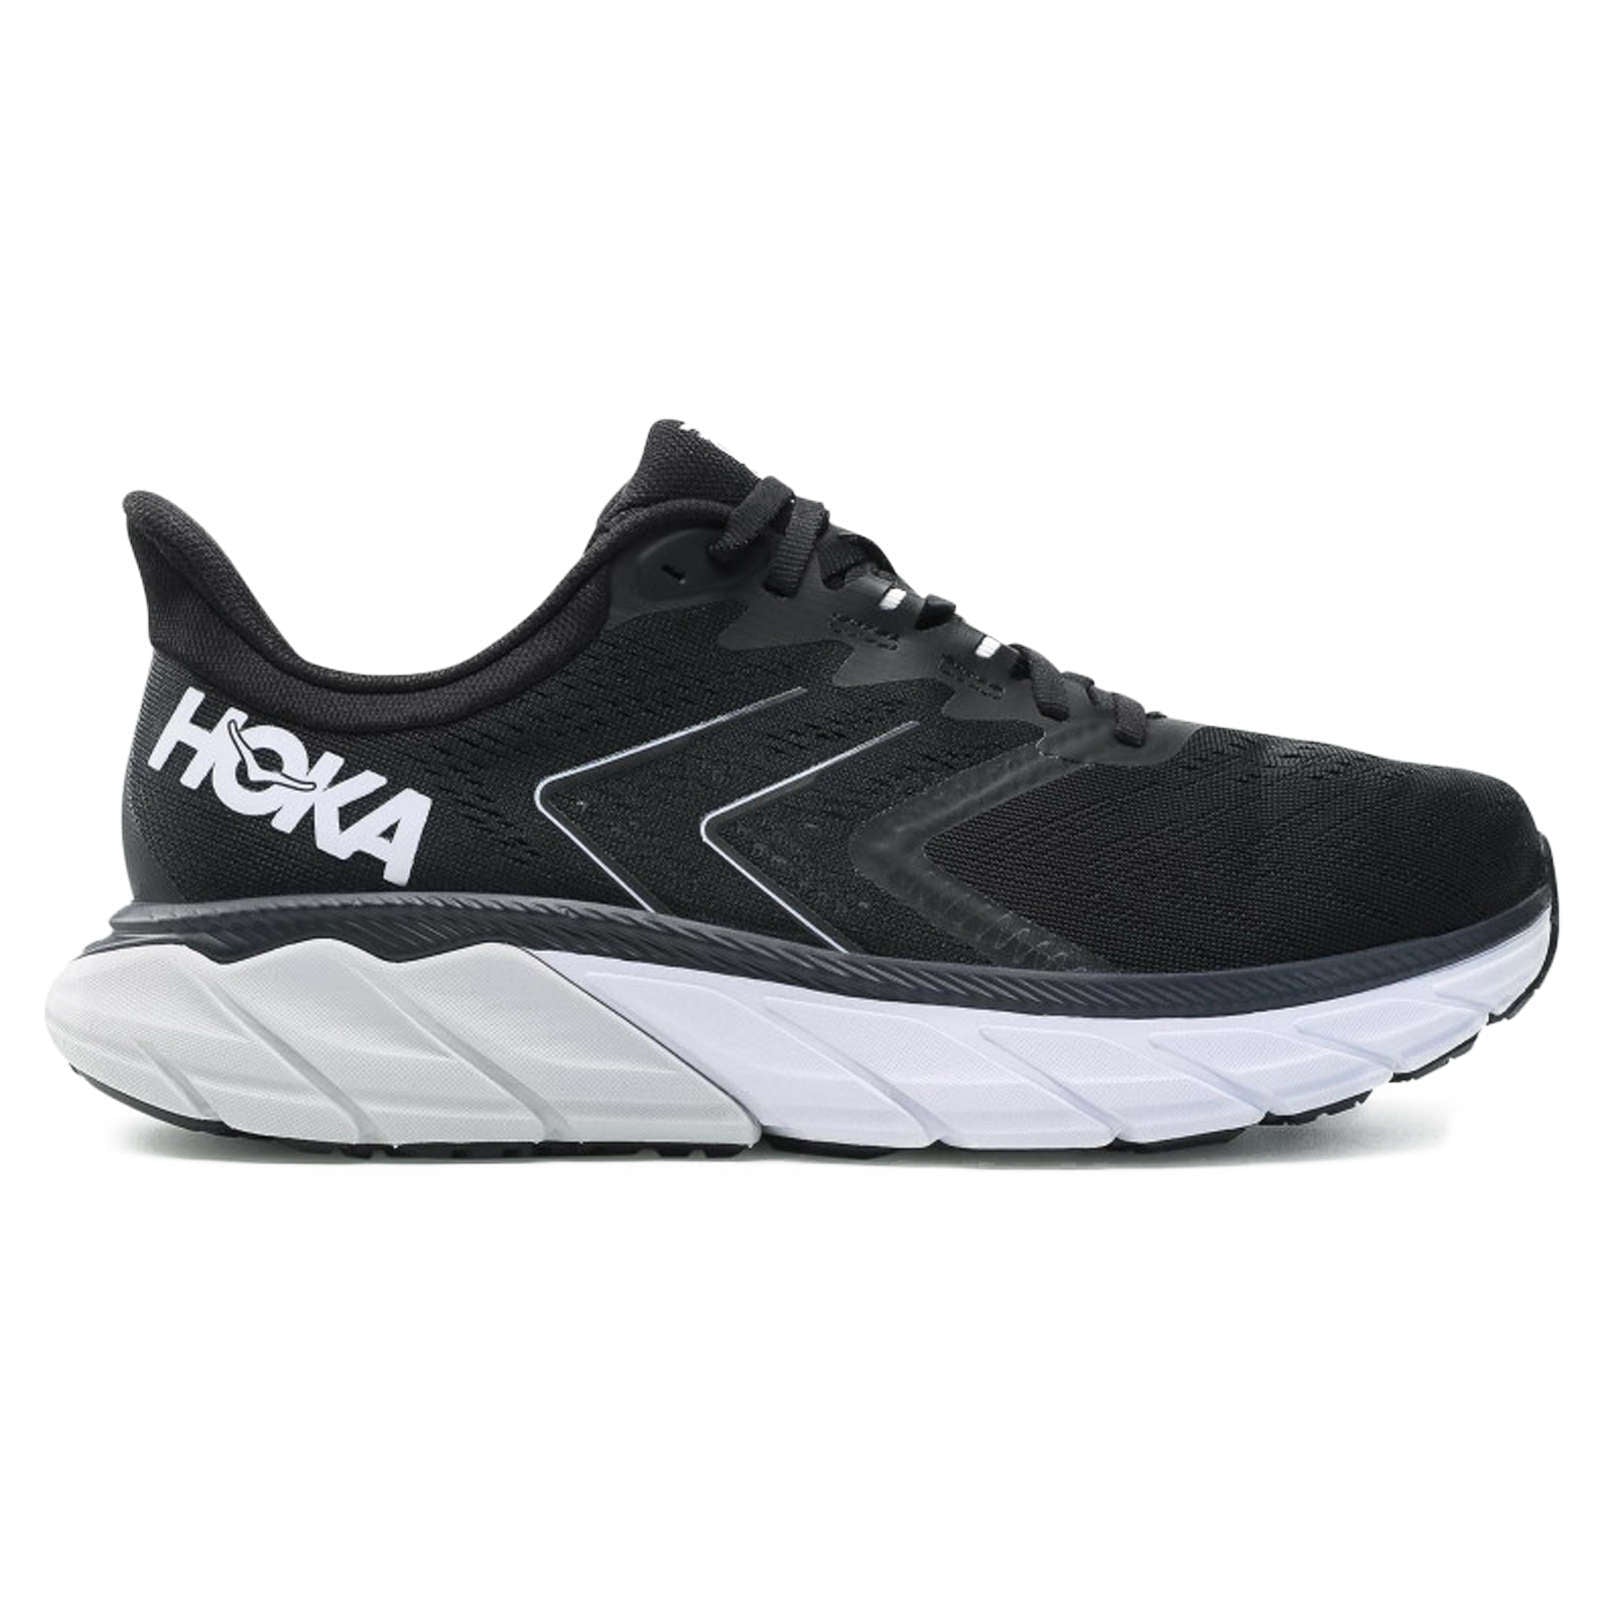 Hoka One One Arahi 5 Synthetic Textile Men's Low-Top Road Running Trainers#color_black white